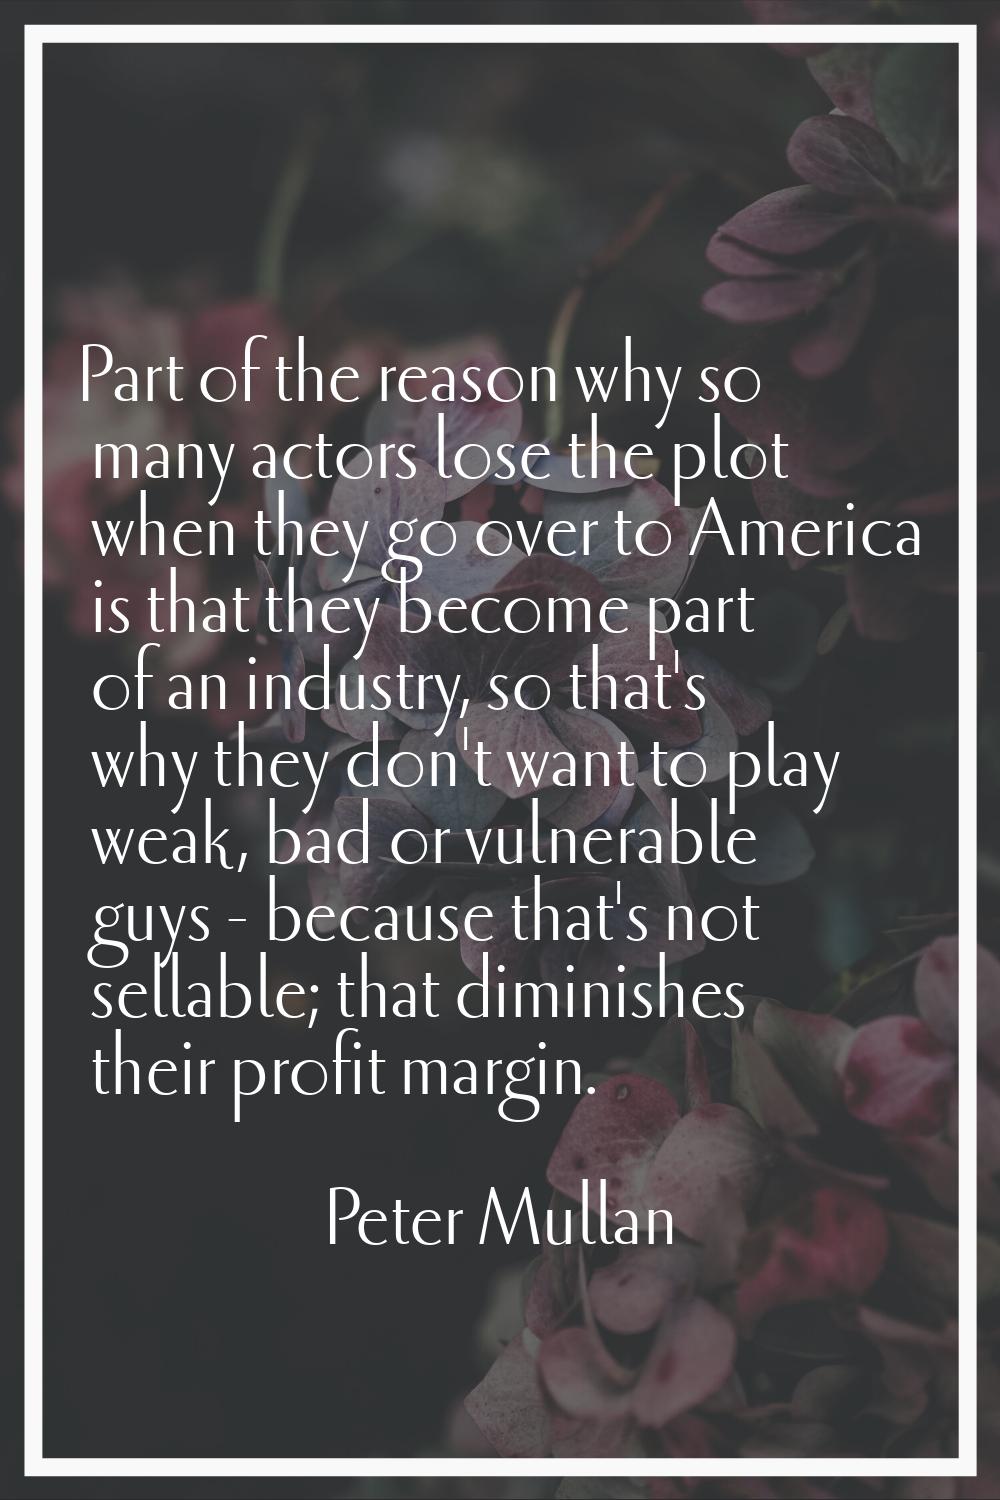 Part of the reason why so many actors lose the plot when they go over to America is that they becom